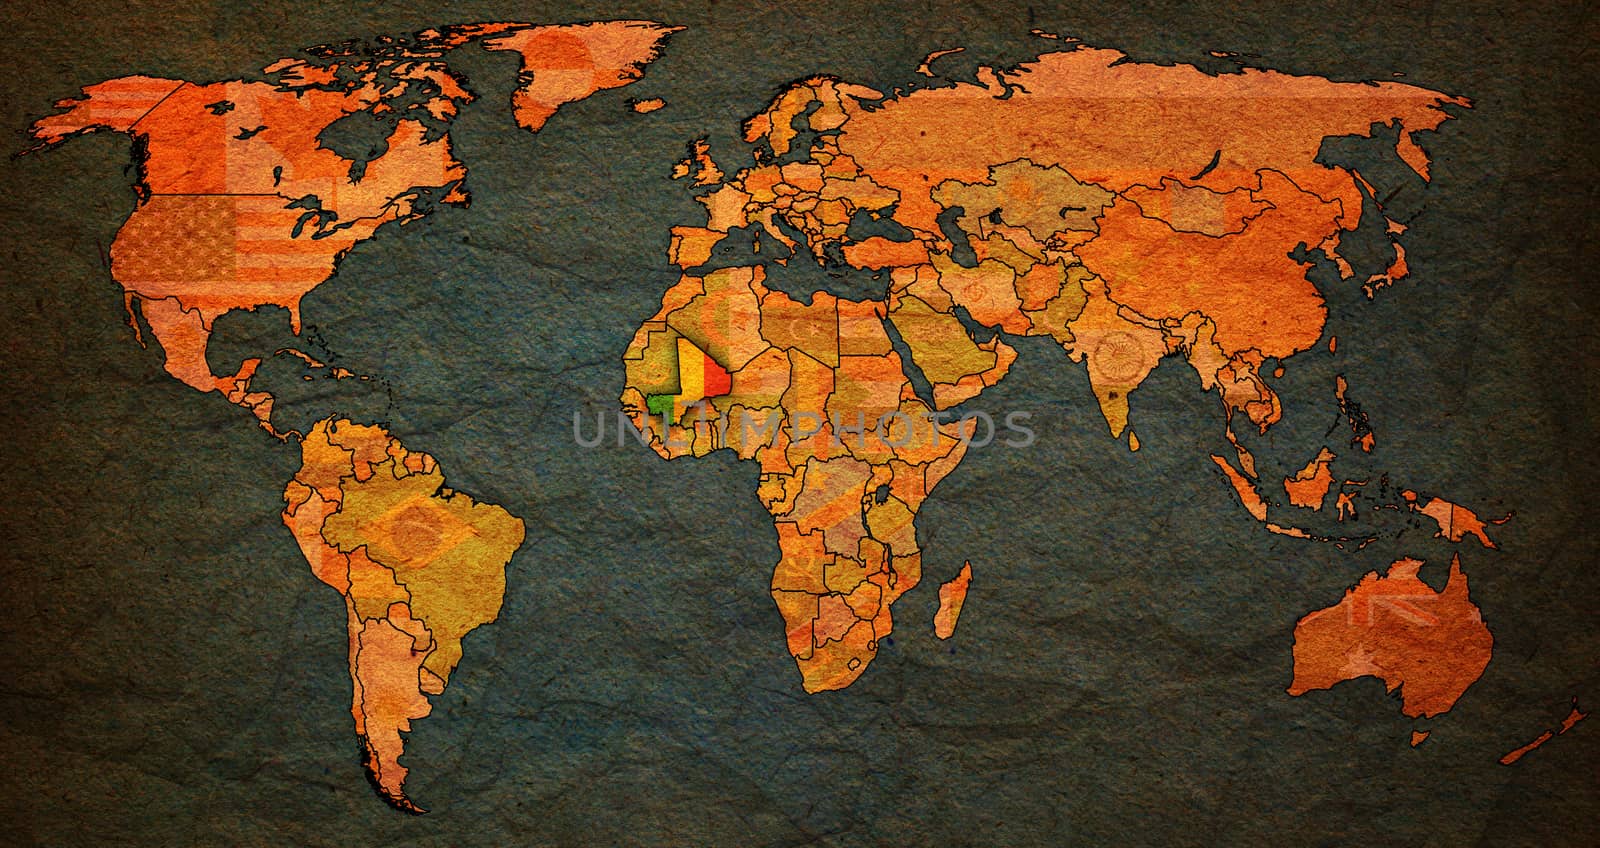 mali territory on world map by michal812